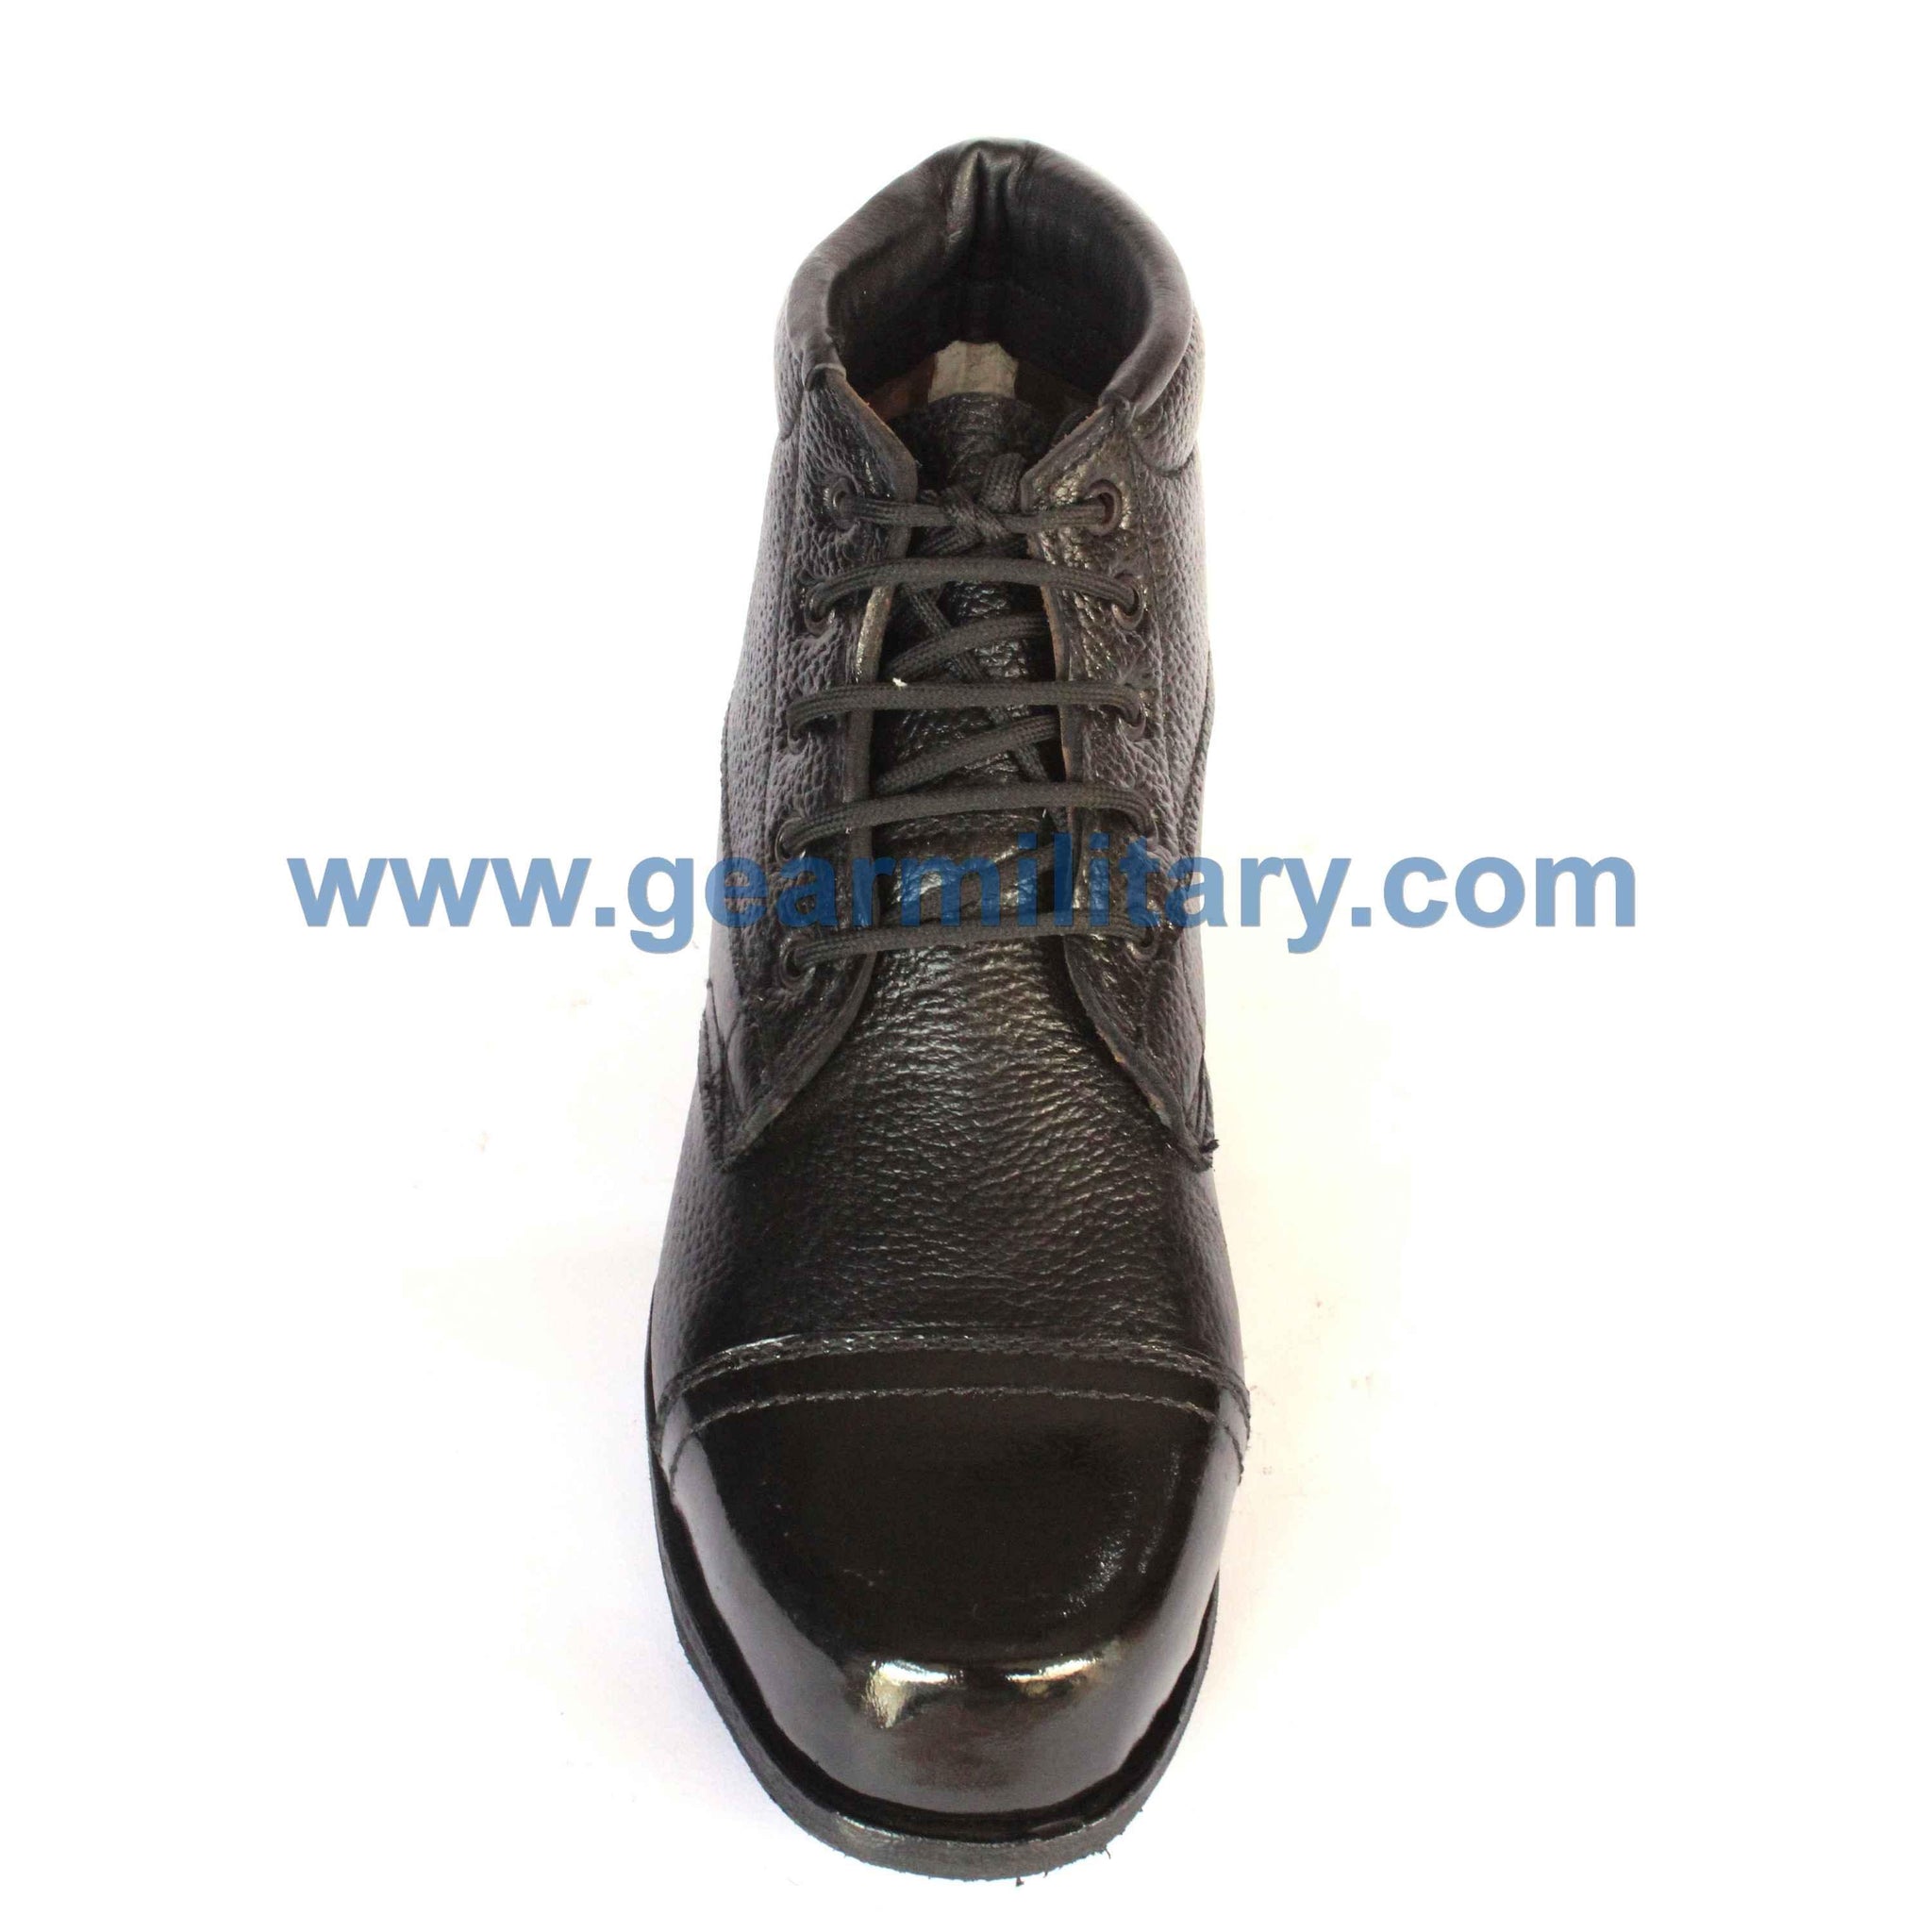 Buy Handmade ankle shoes or drill boots – gearmilitary